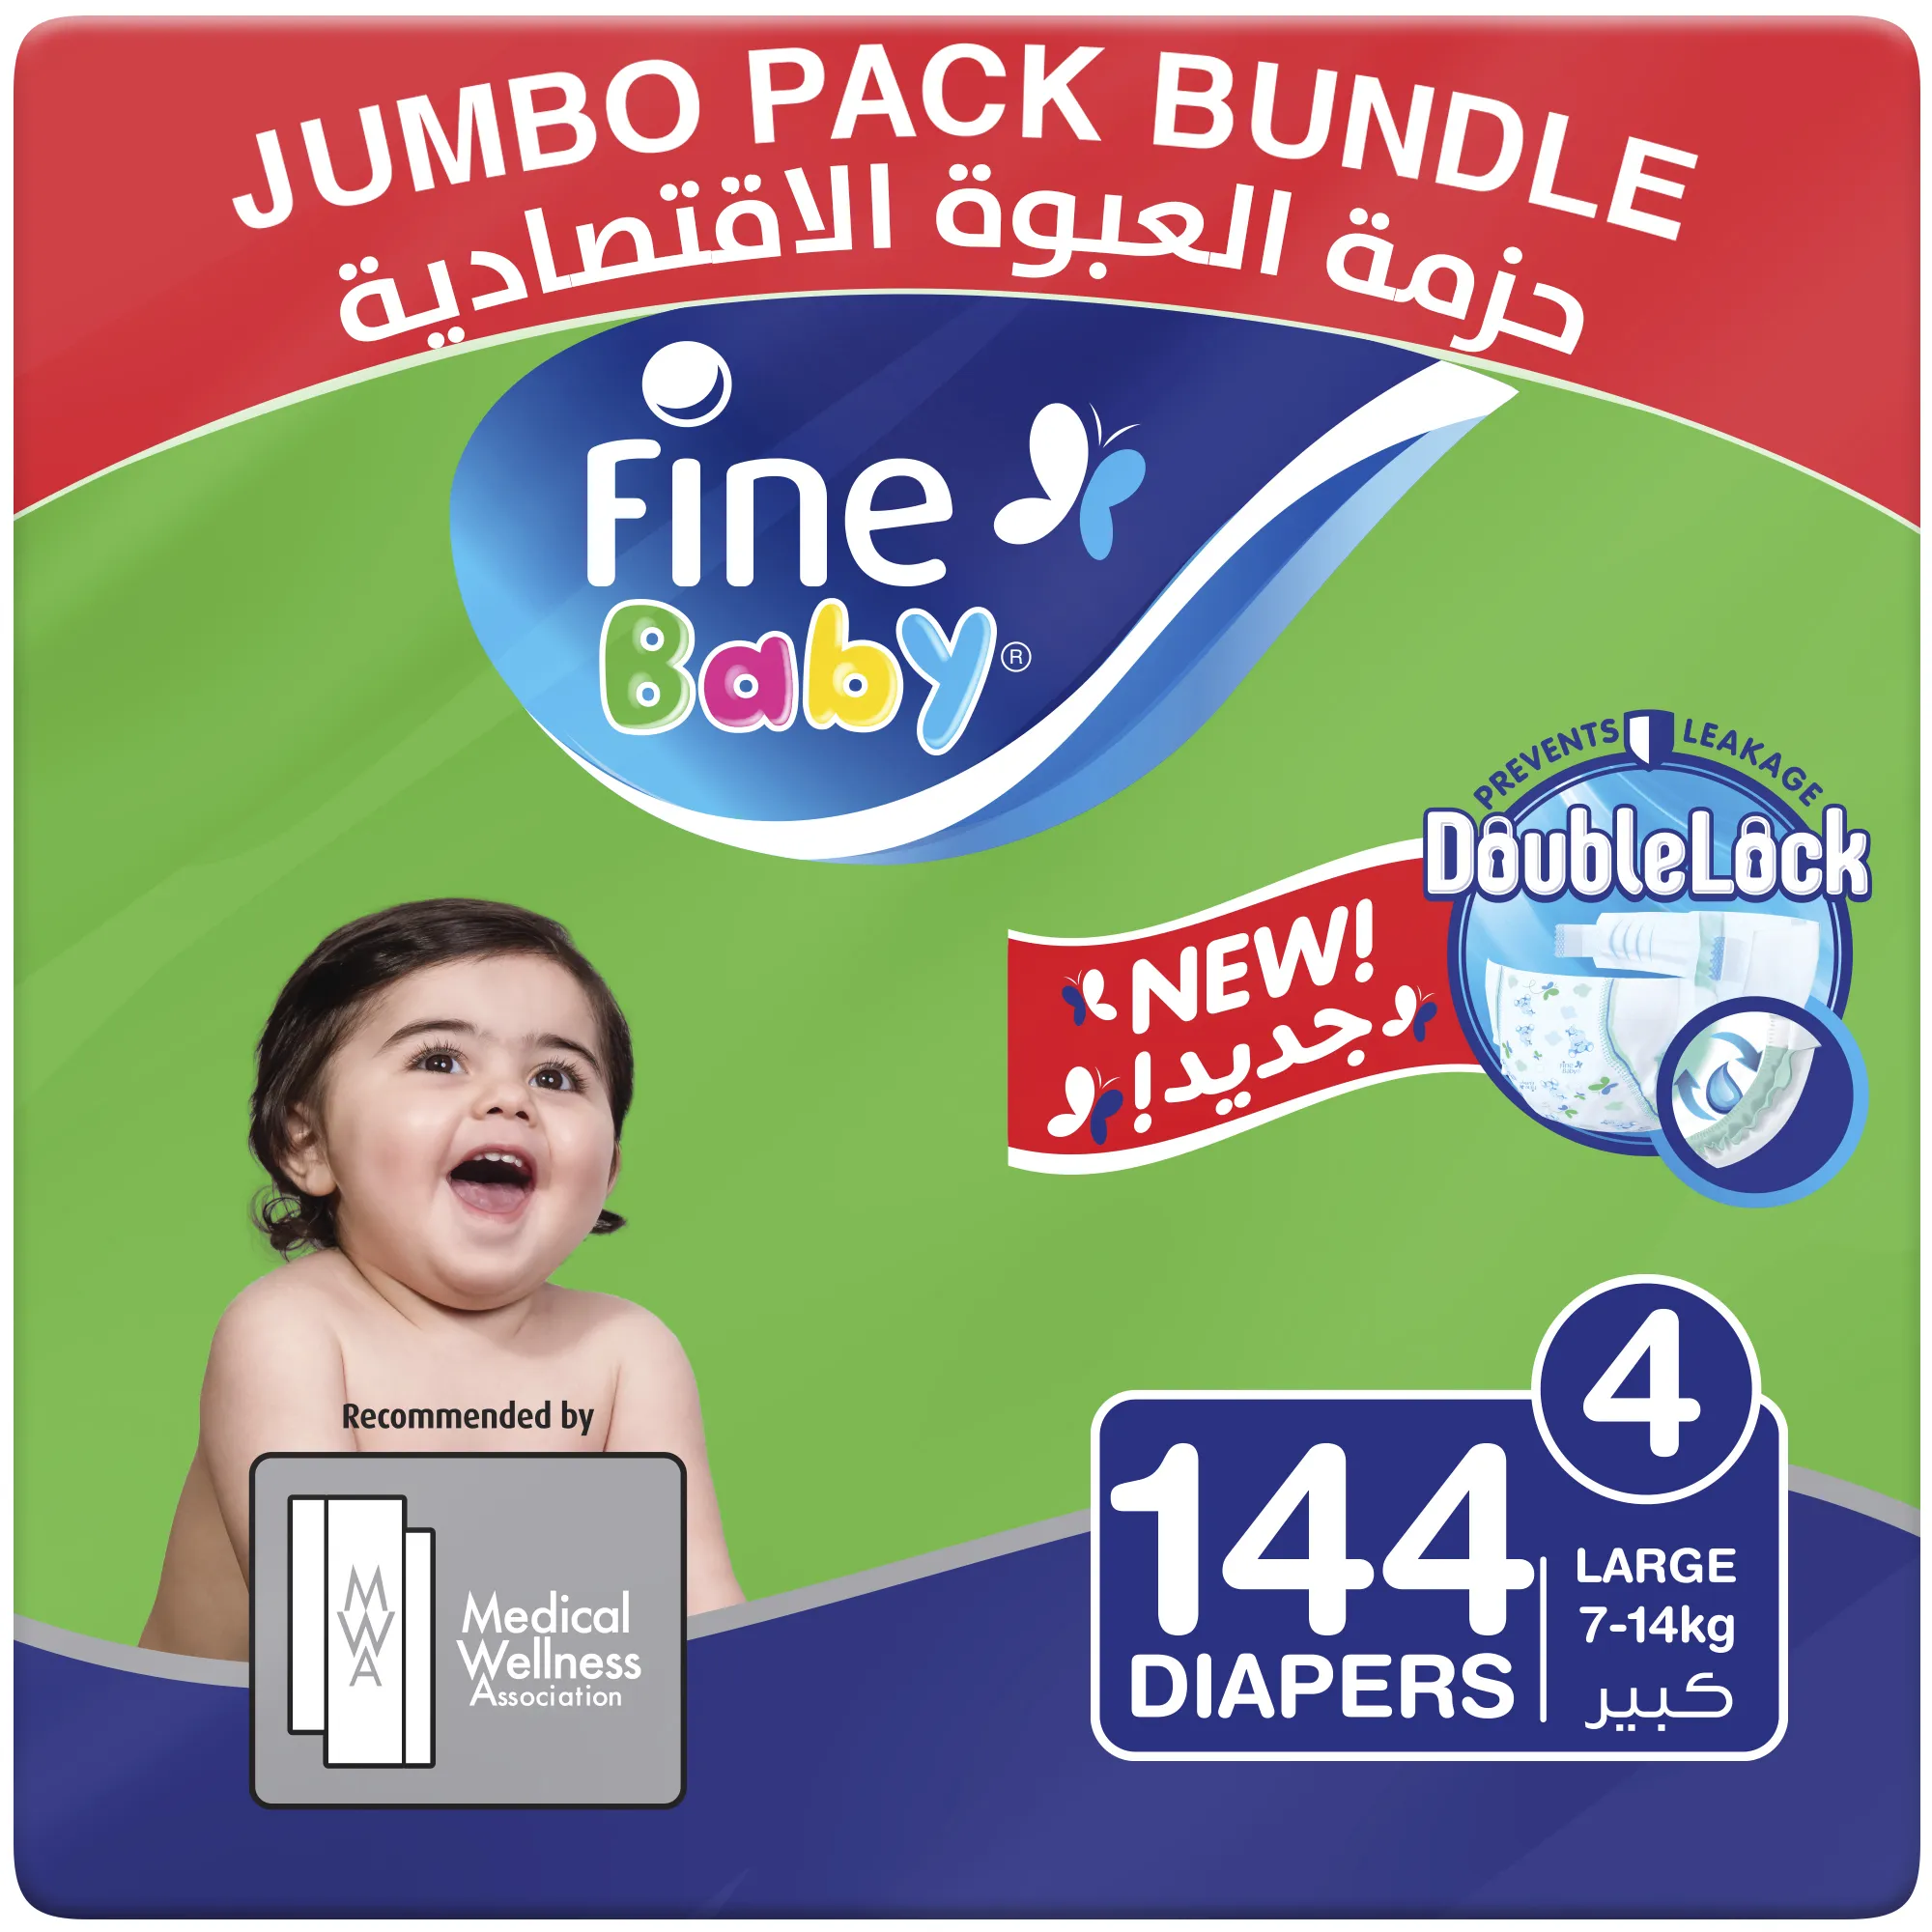 Fine Baby Diapers, Size 4, Large 7 14kg, Jumbo Pack, 3 packs of 48 diapers, 144 total count